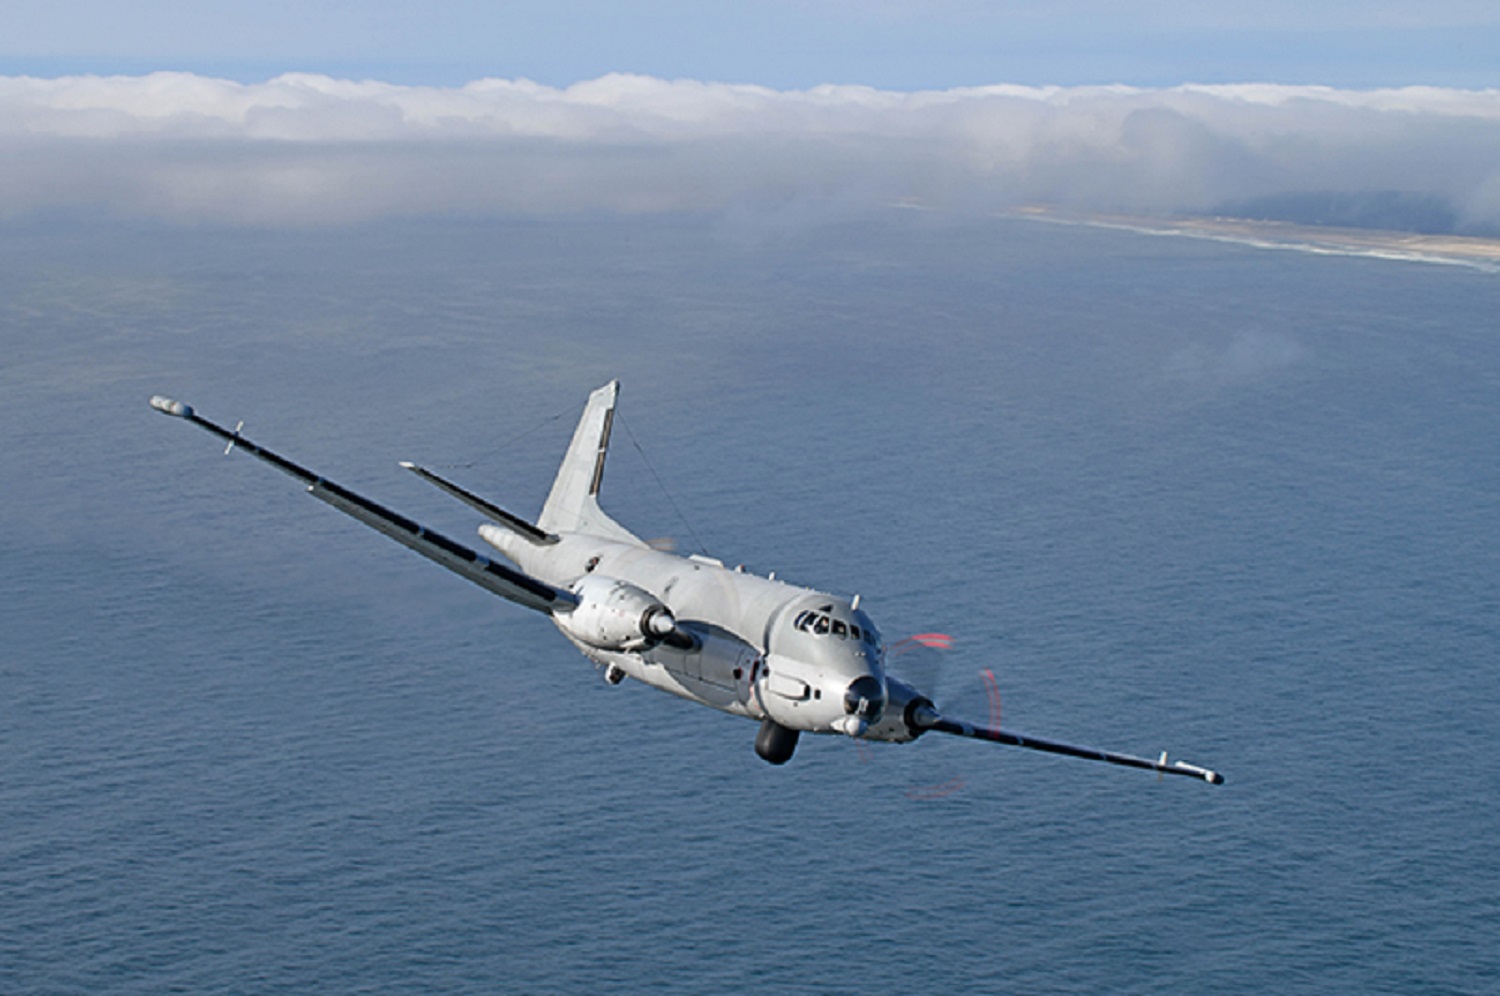 ATL2 Maritime Patrol Aircraft as a Testbed for SEARCHMASTER's AI Functions